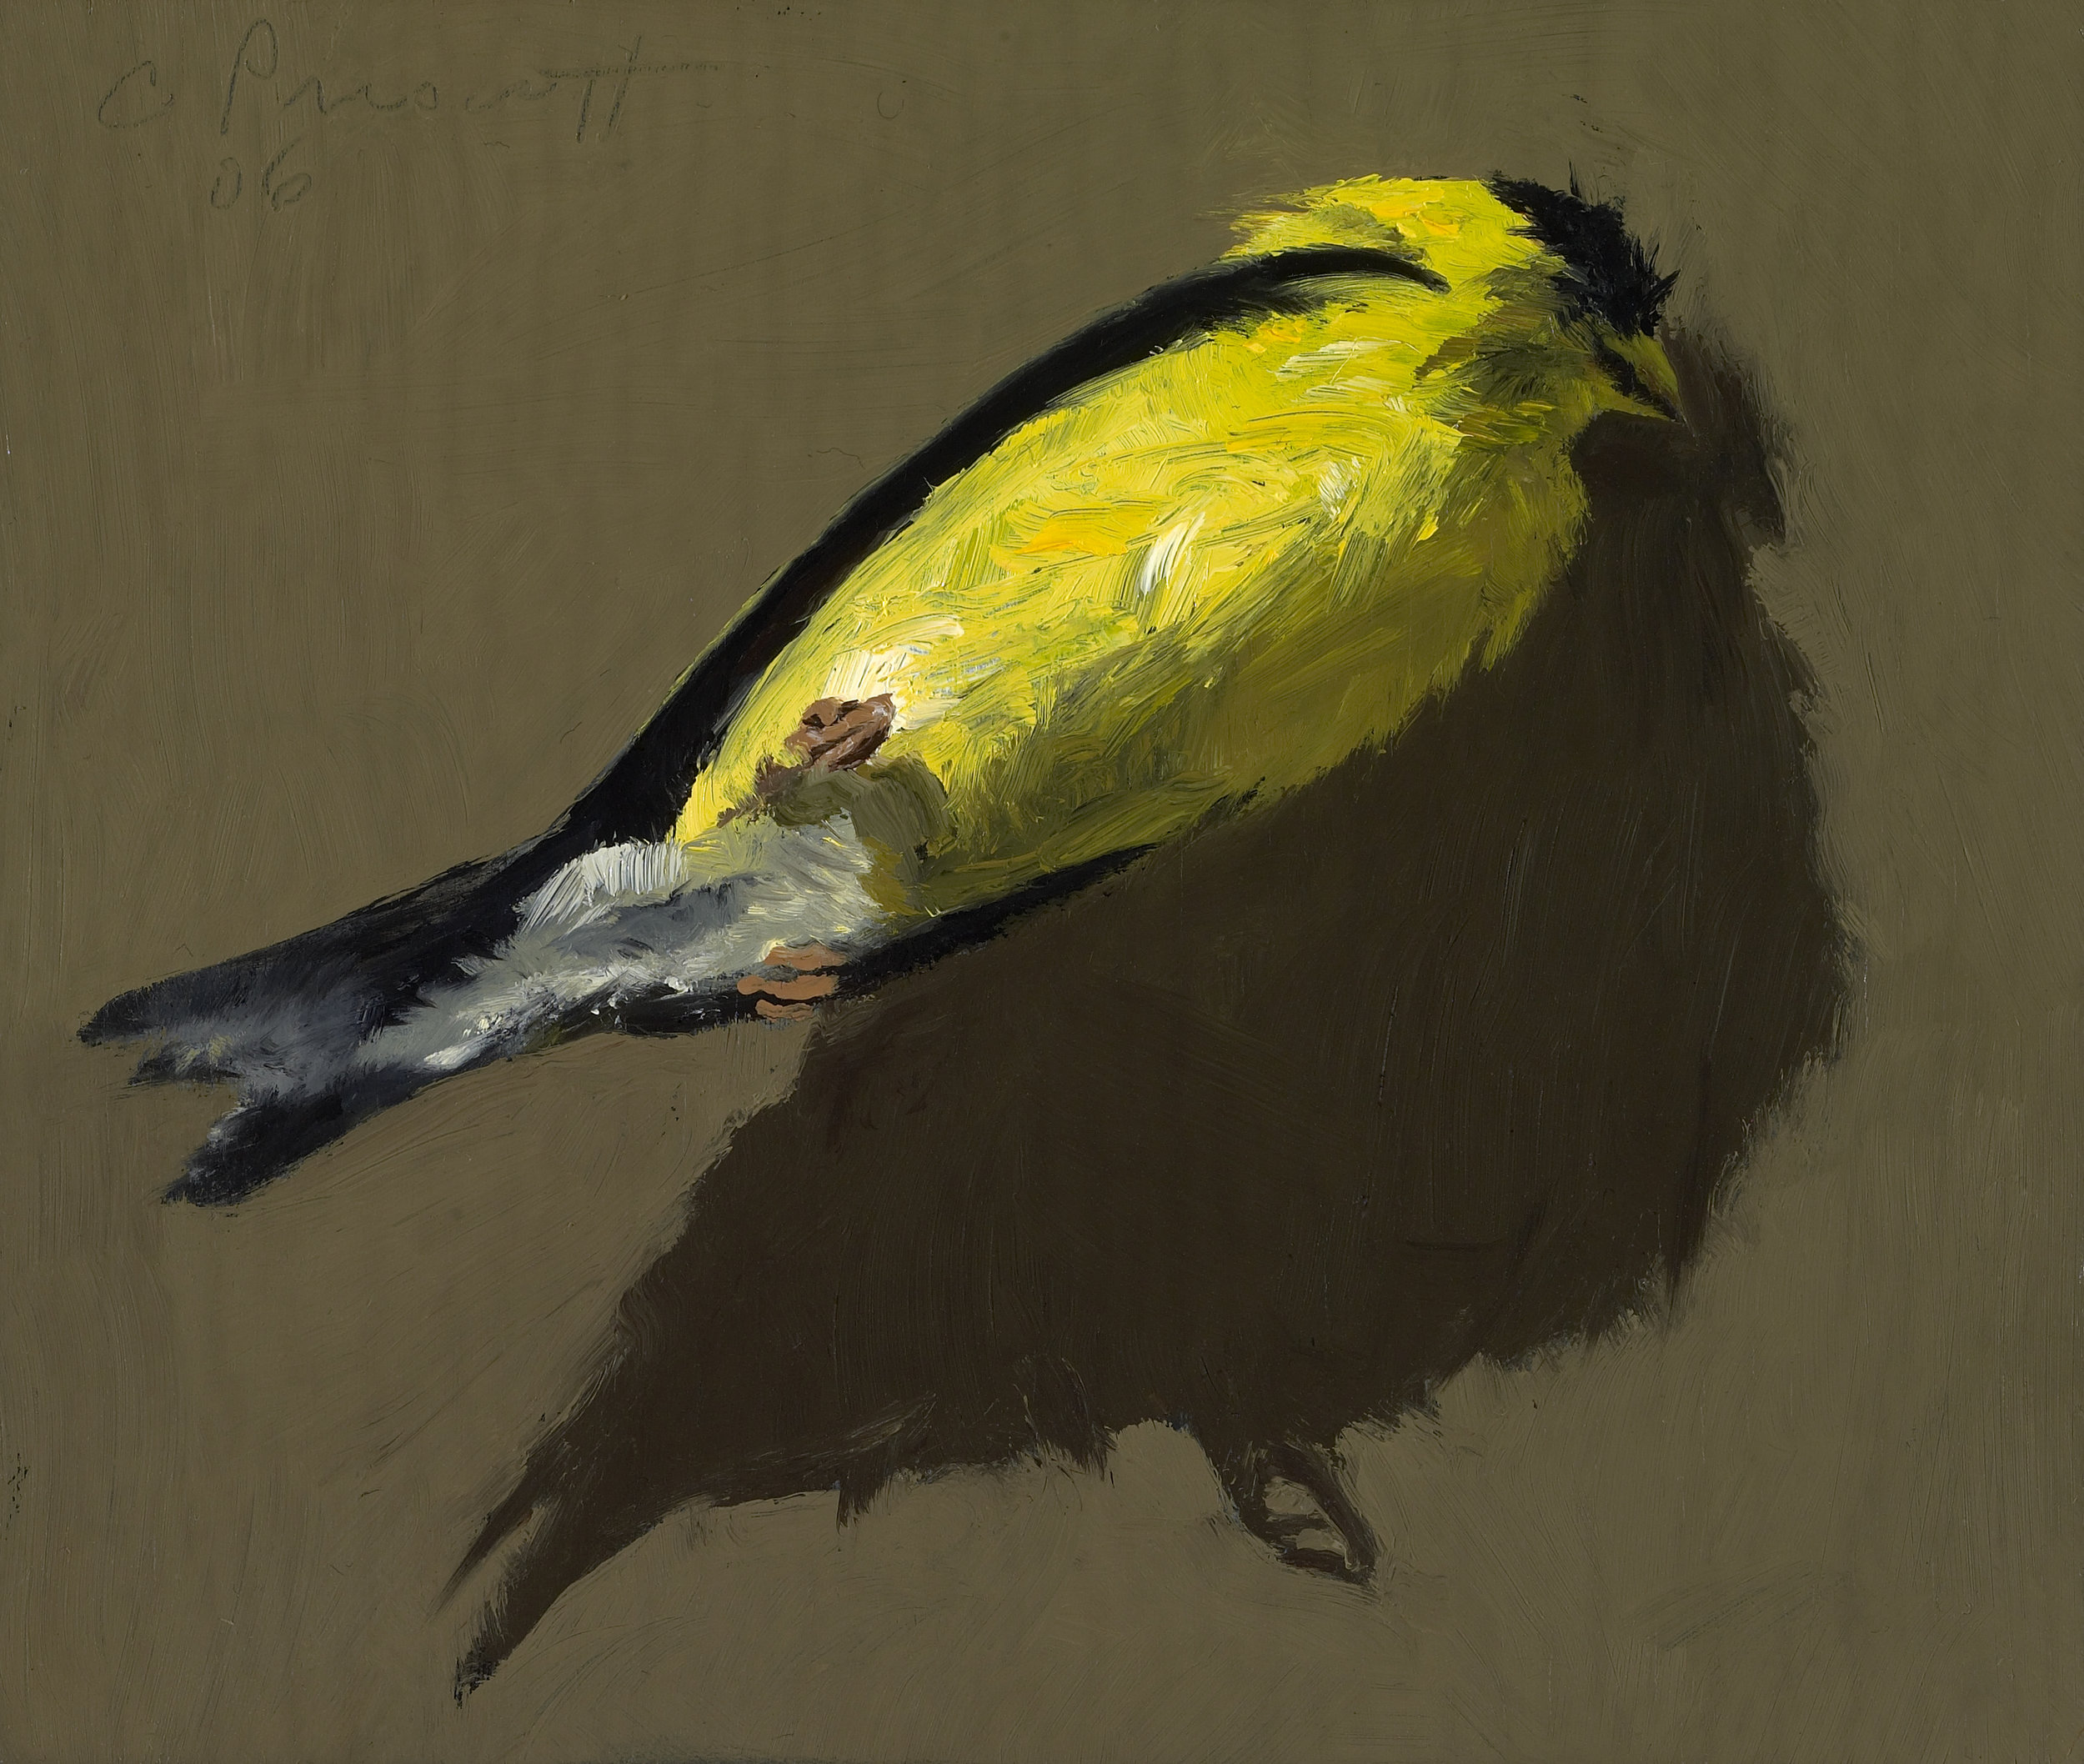   Goldfinch , Oil on Wood Panel, 2006, 5" x 6" 